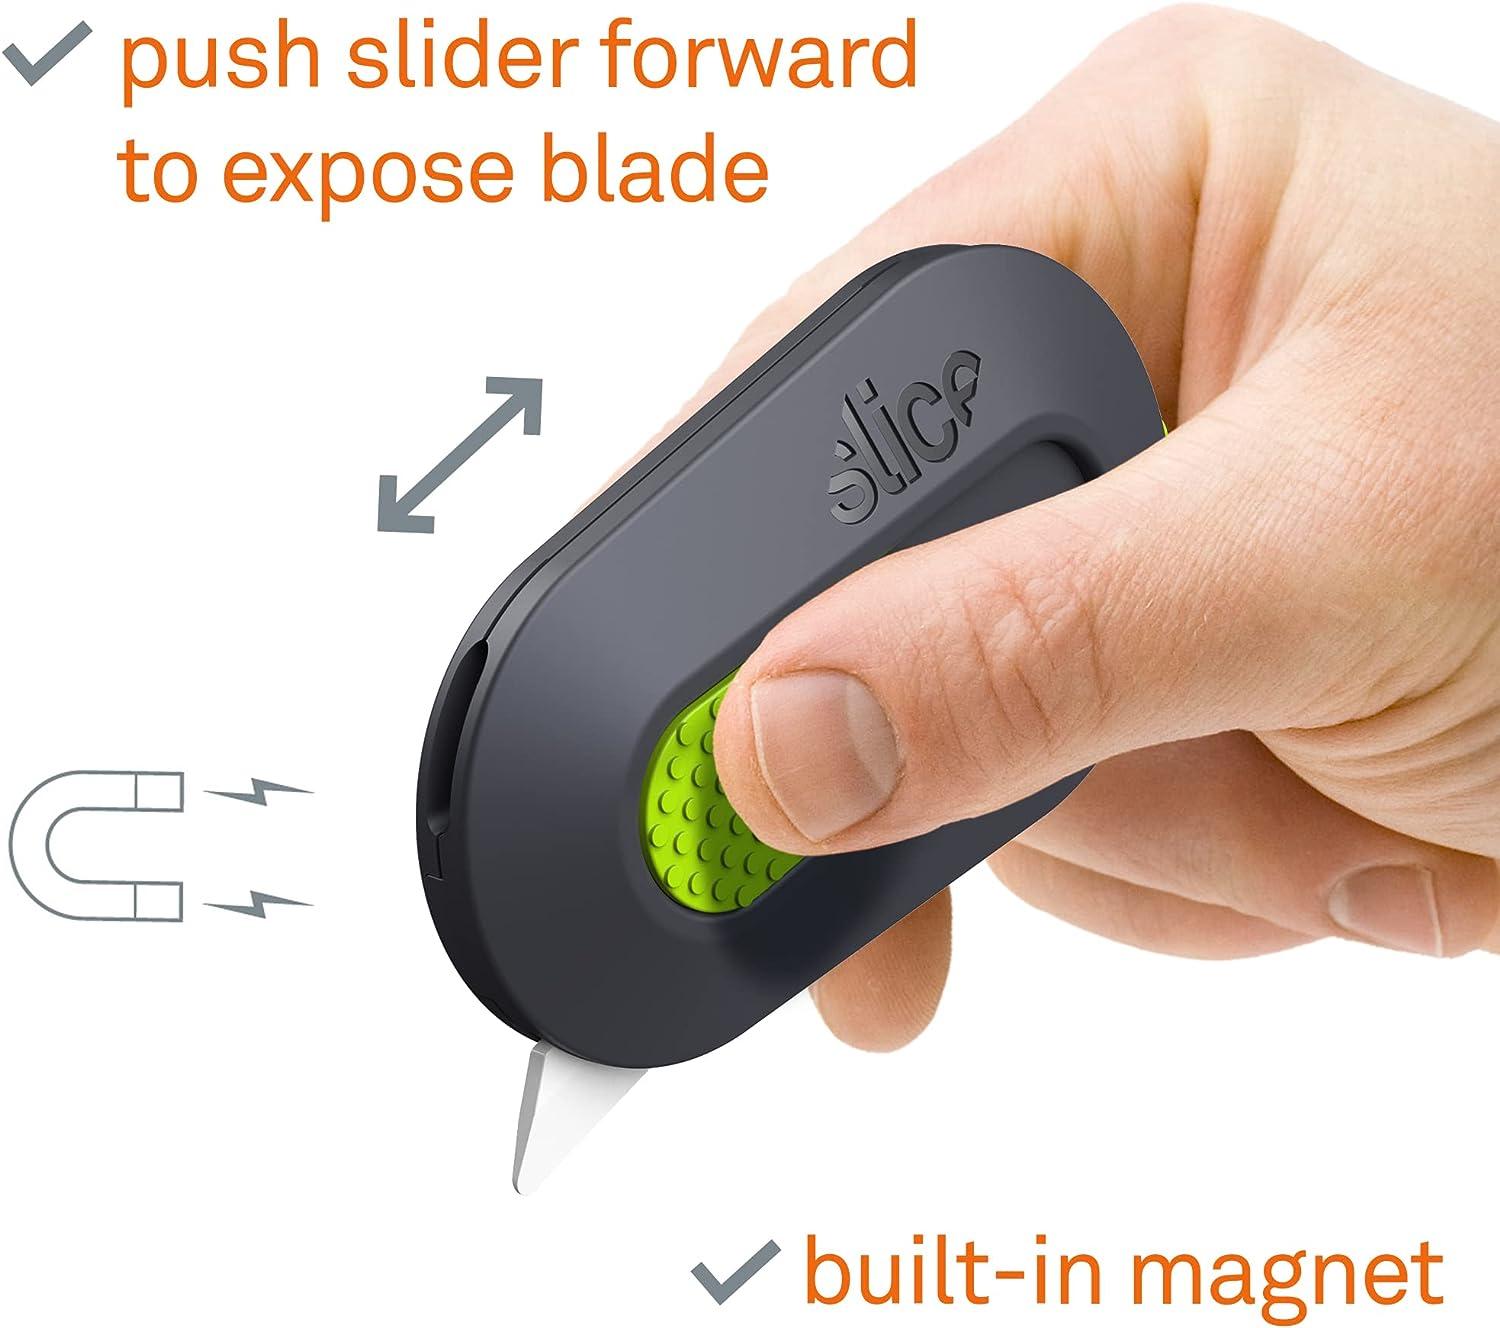 Slice Ceramic Blade, Safety Cutter Finger Friendly, Cuts Blister